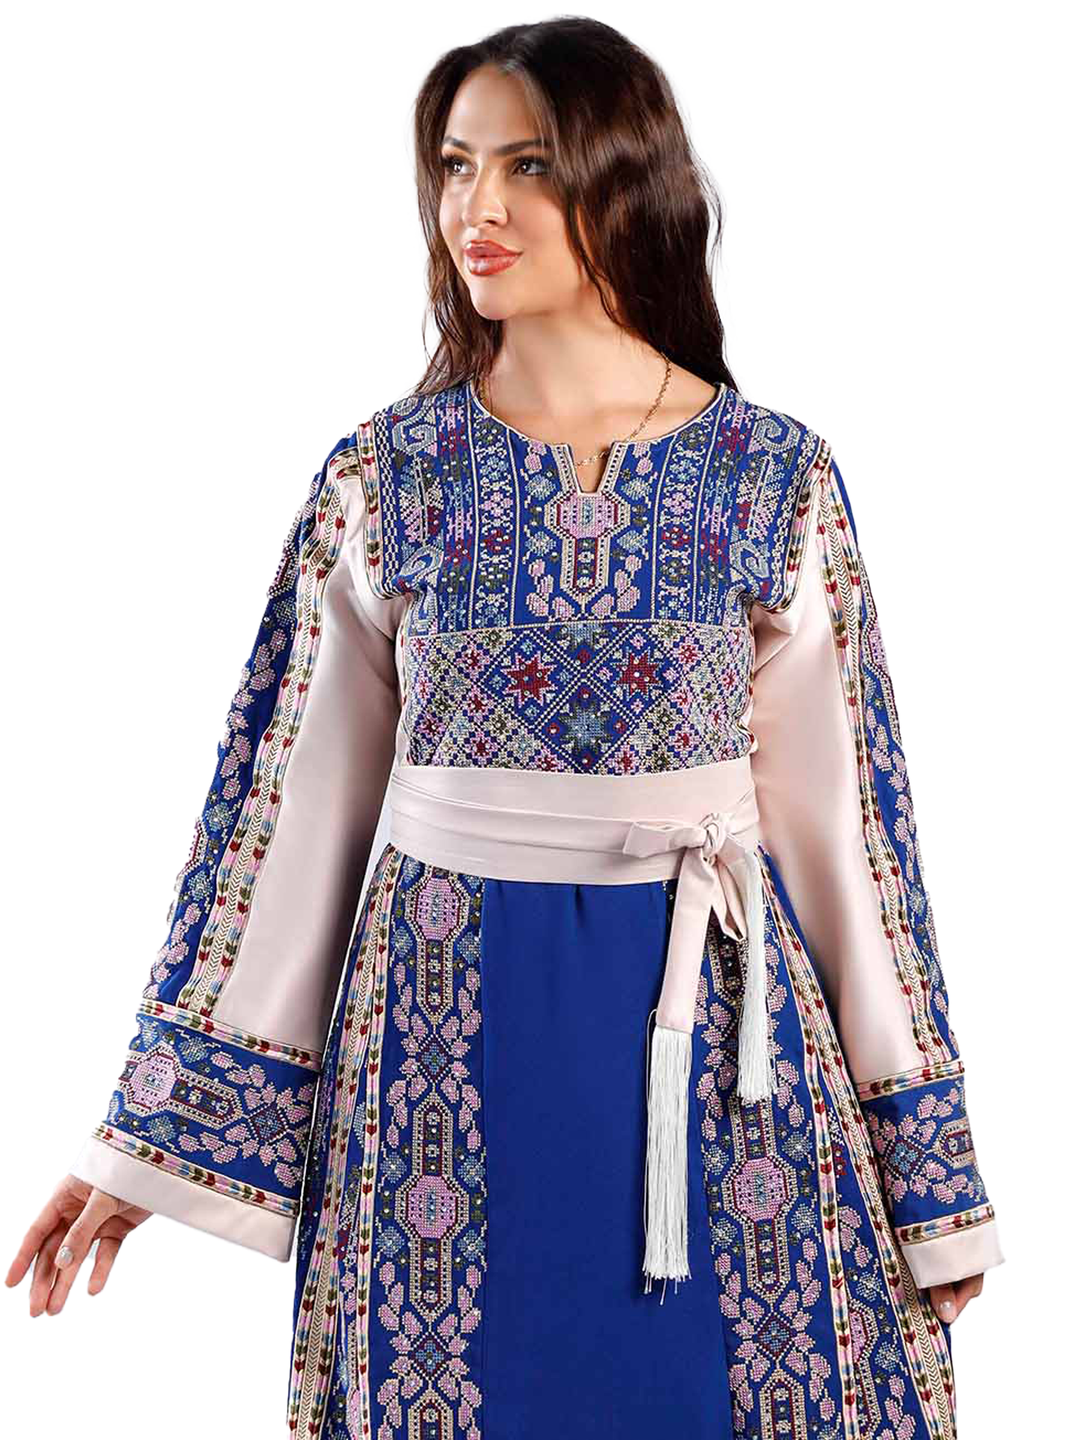 Jericho's Beauty - High Quality Embroidered Traditional Palestinian style Thobe